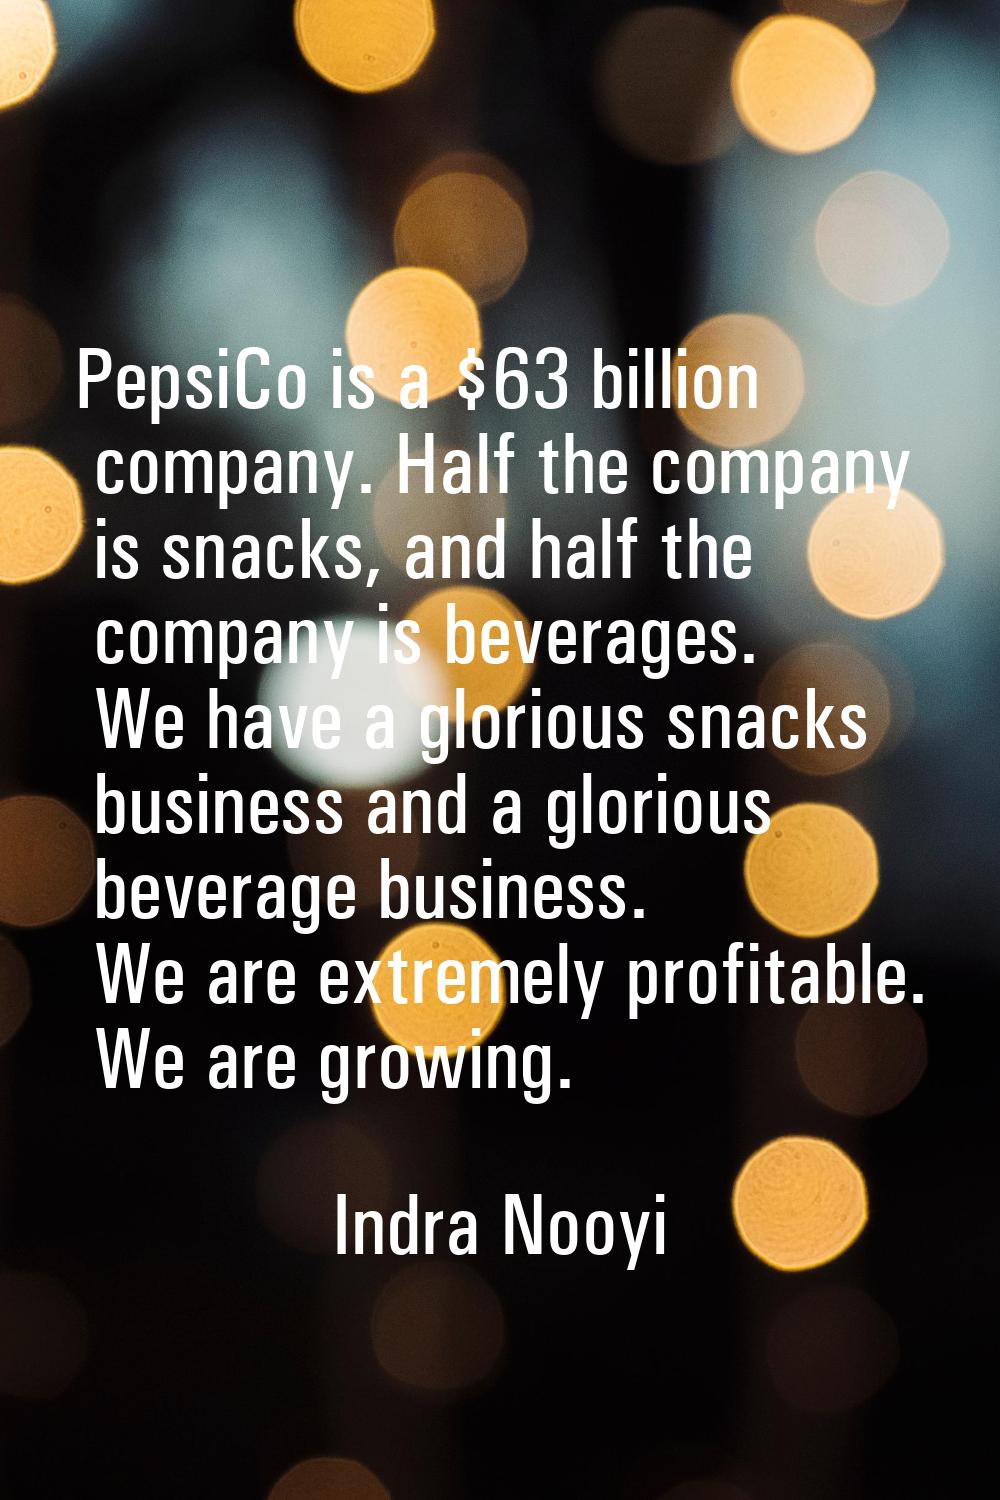 PepsiCo is a $63 billion company. Half the company is snacks, and half the company is beverages. We